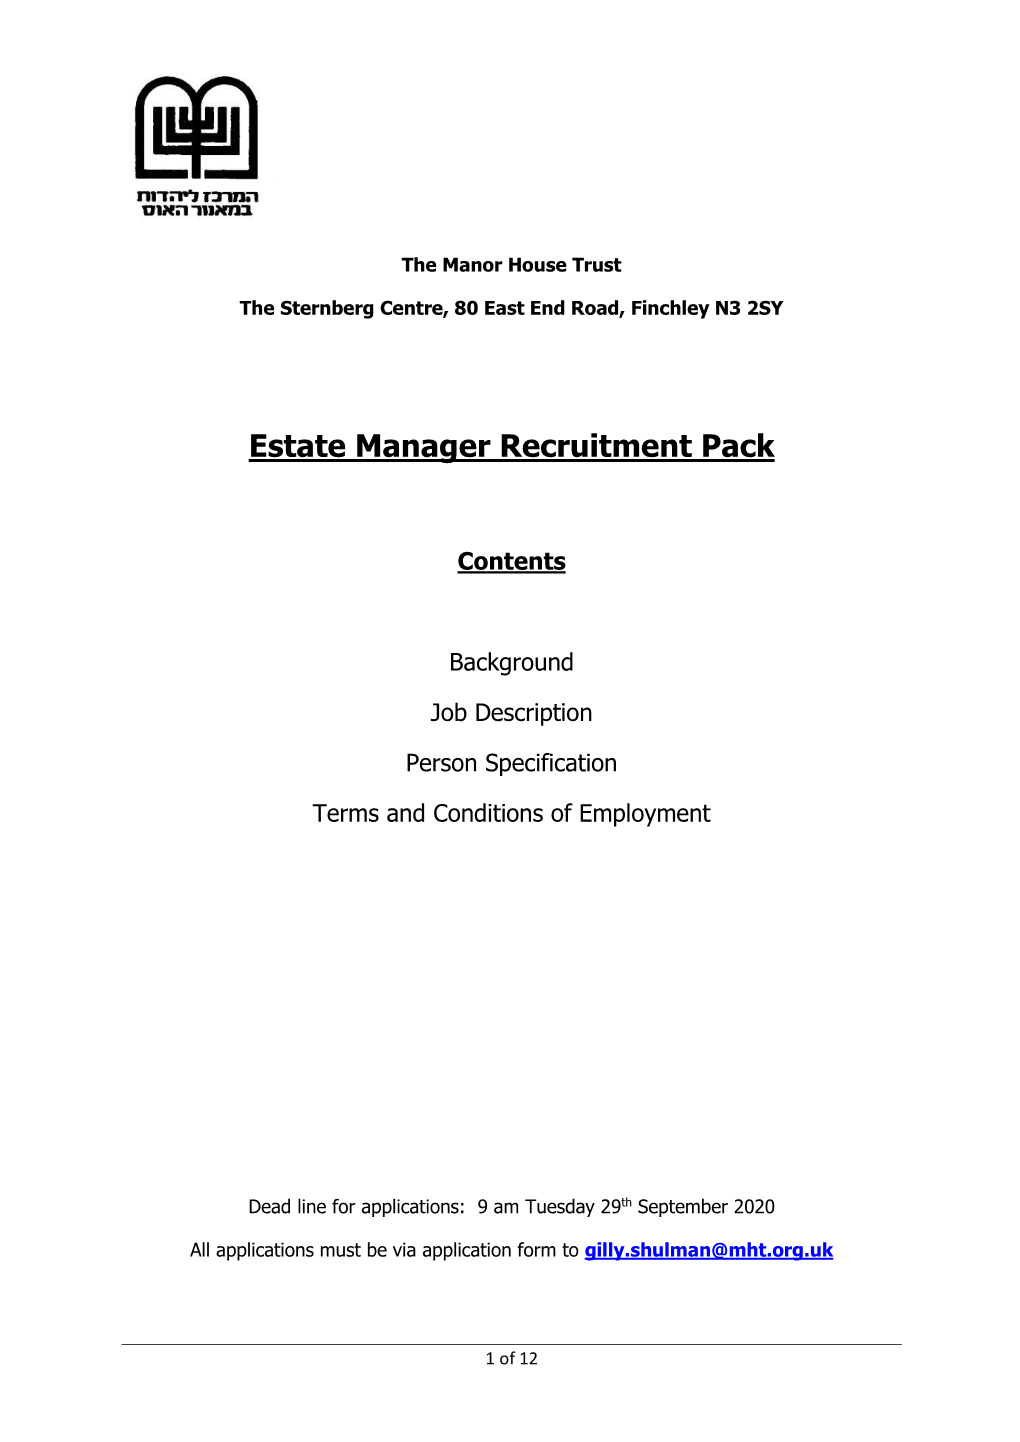 Estate Manager Recruitment Pack